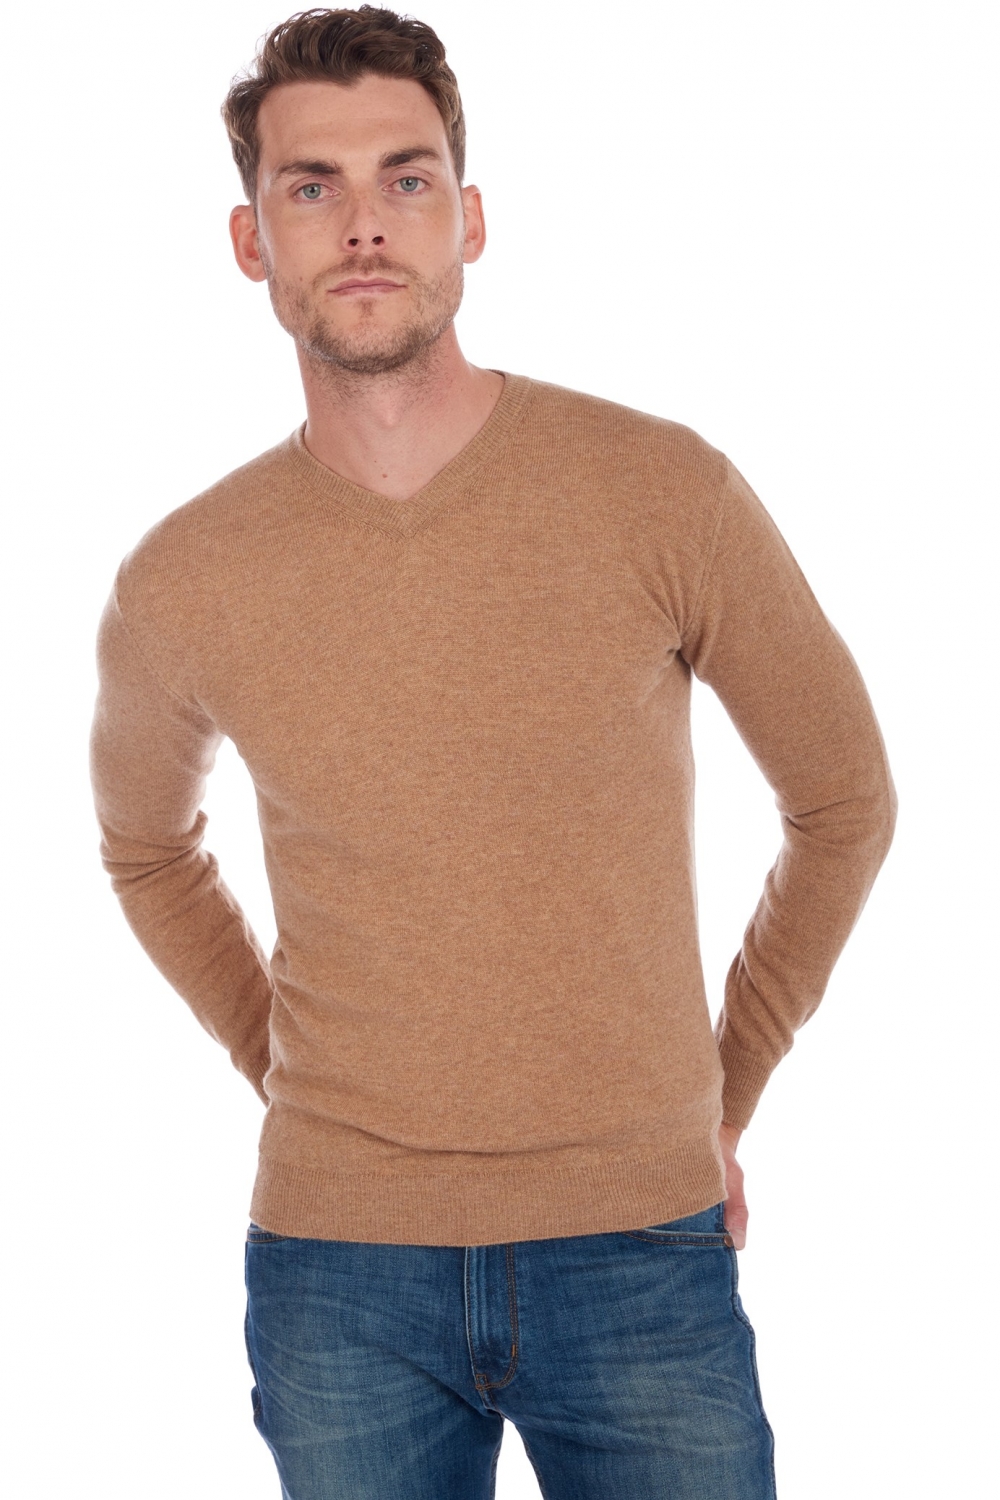 Cachemire pull homme maddox camel chine 4xl